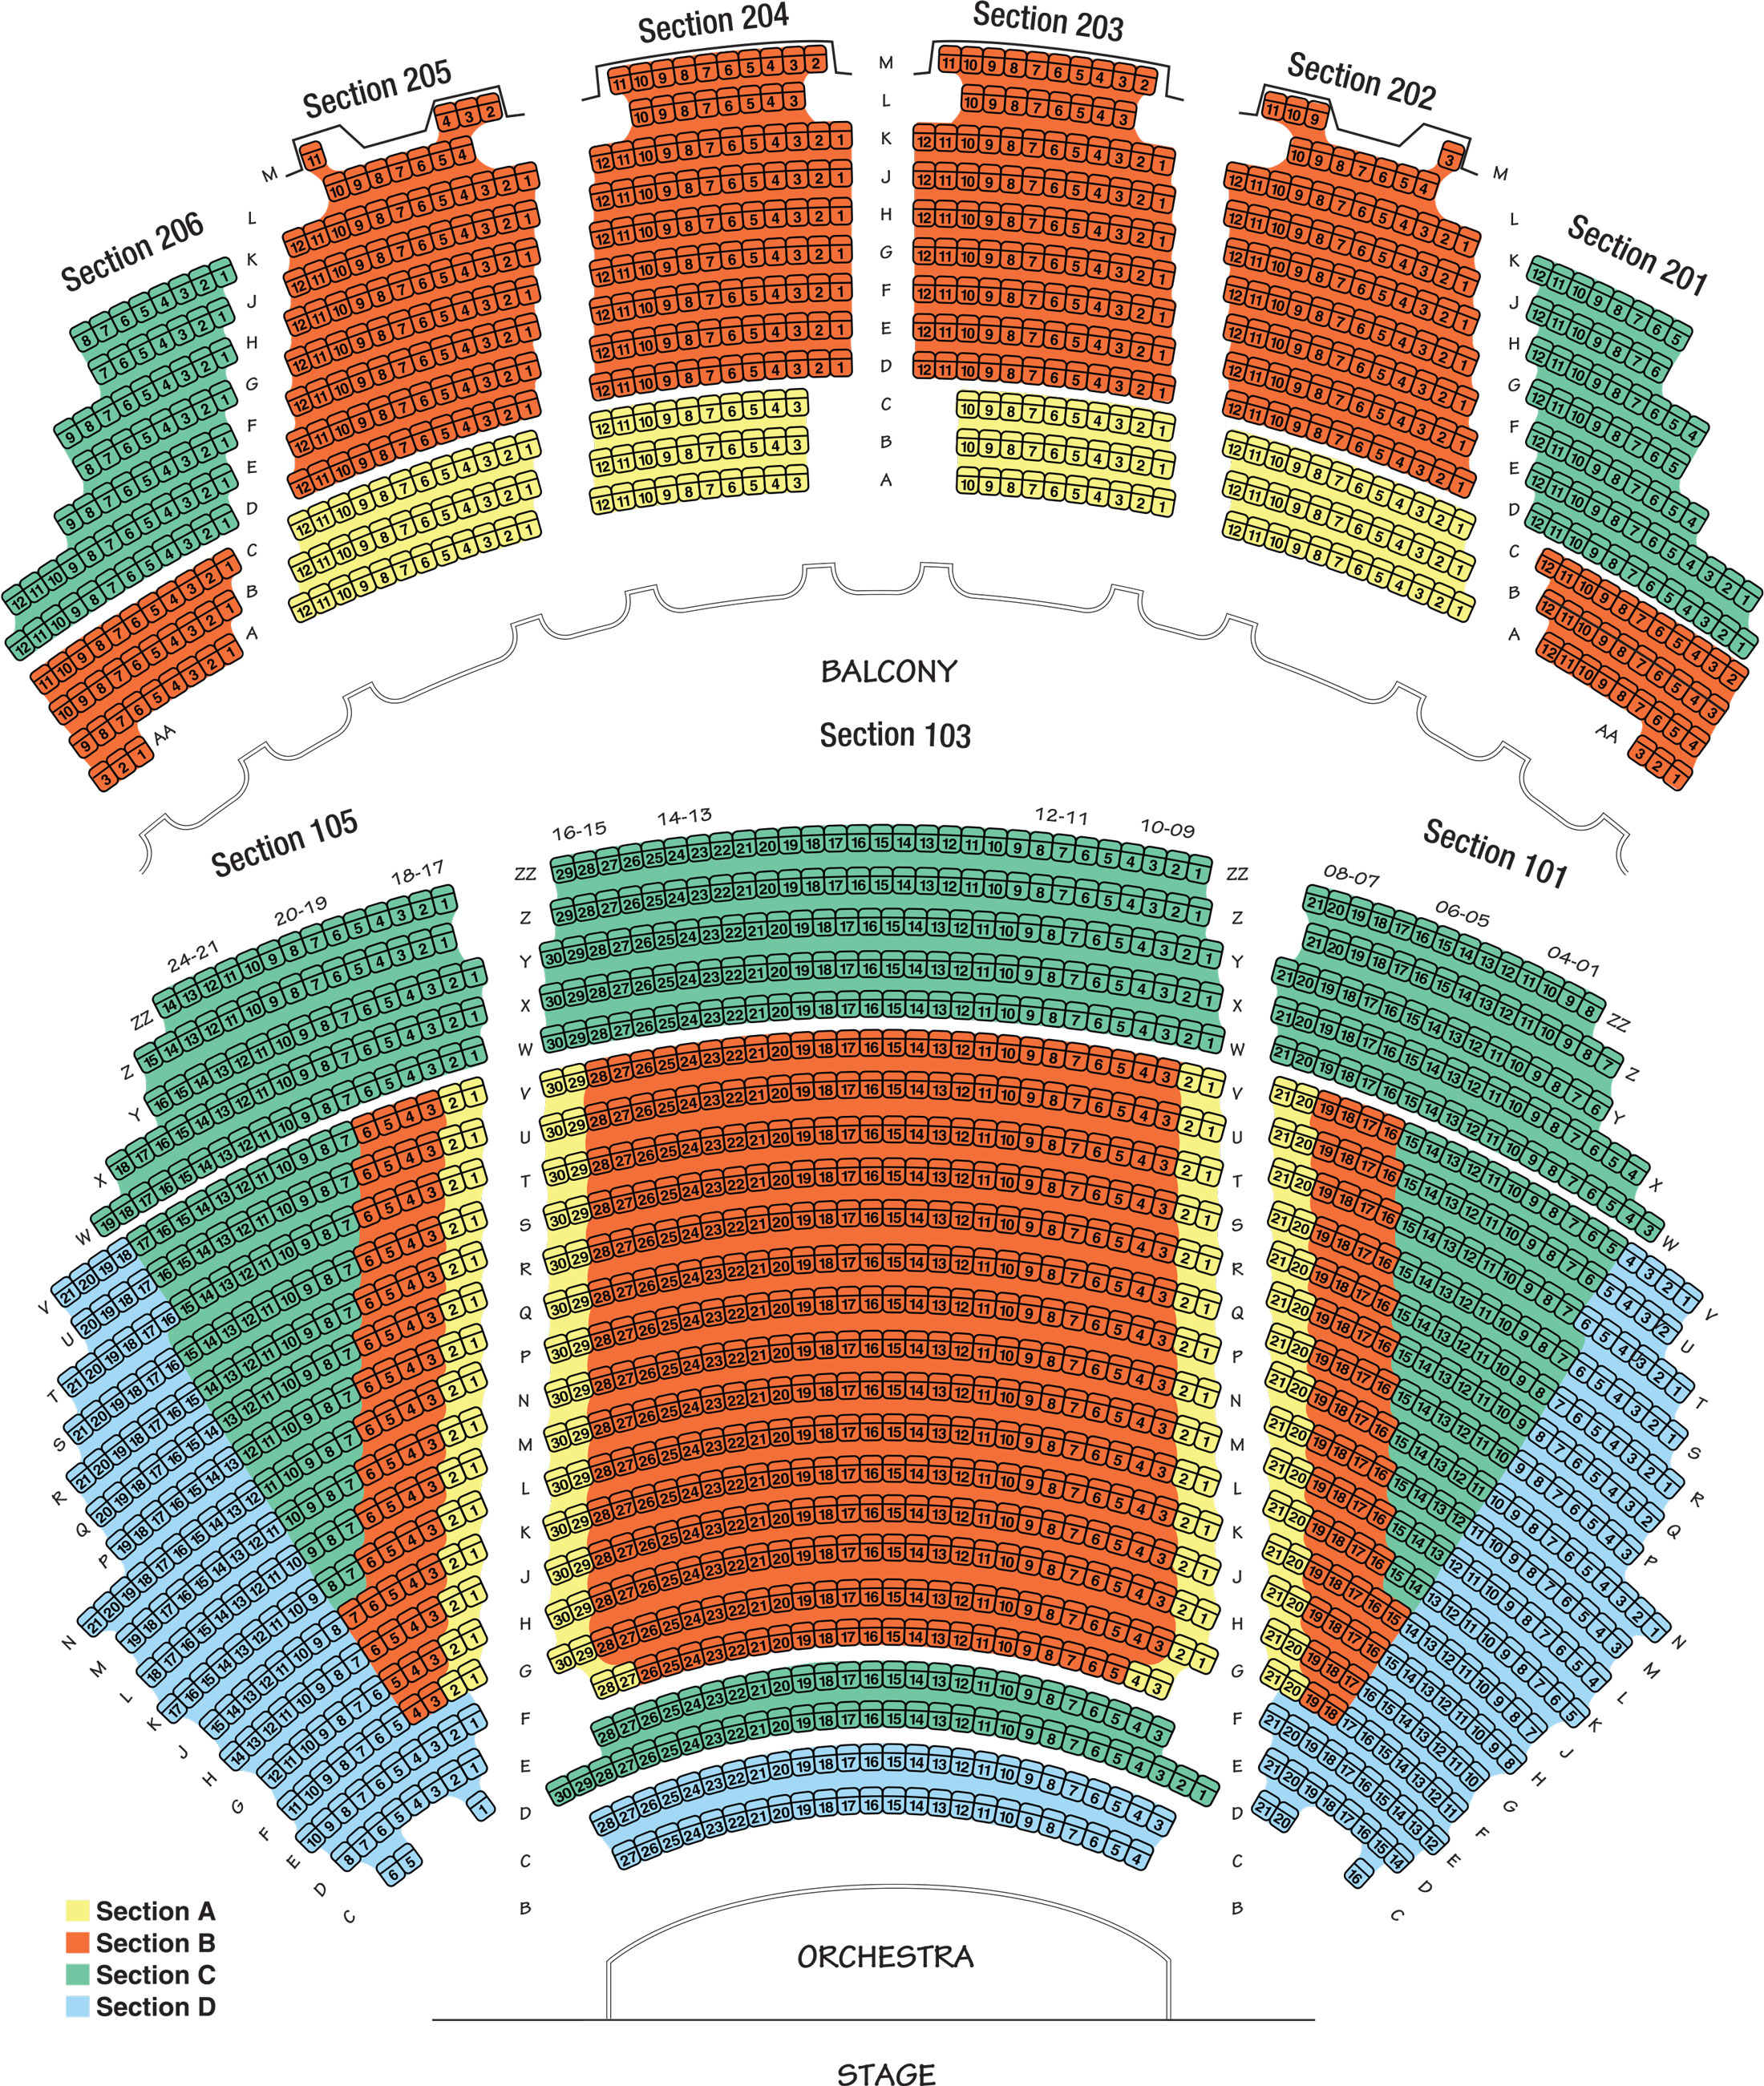 Copps Coliseum Seating Chart - Copps Coliseum Tickets And Copps Coliseum Se...